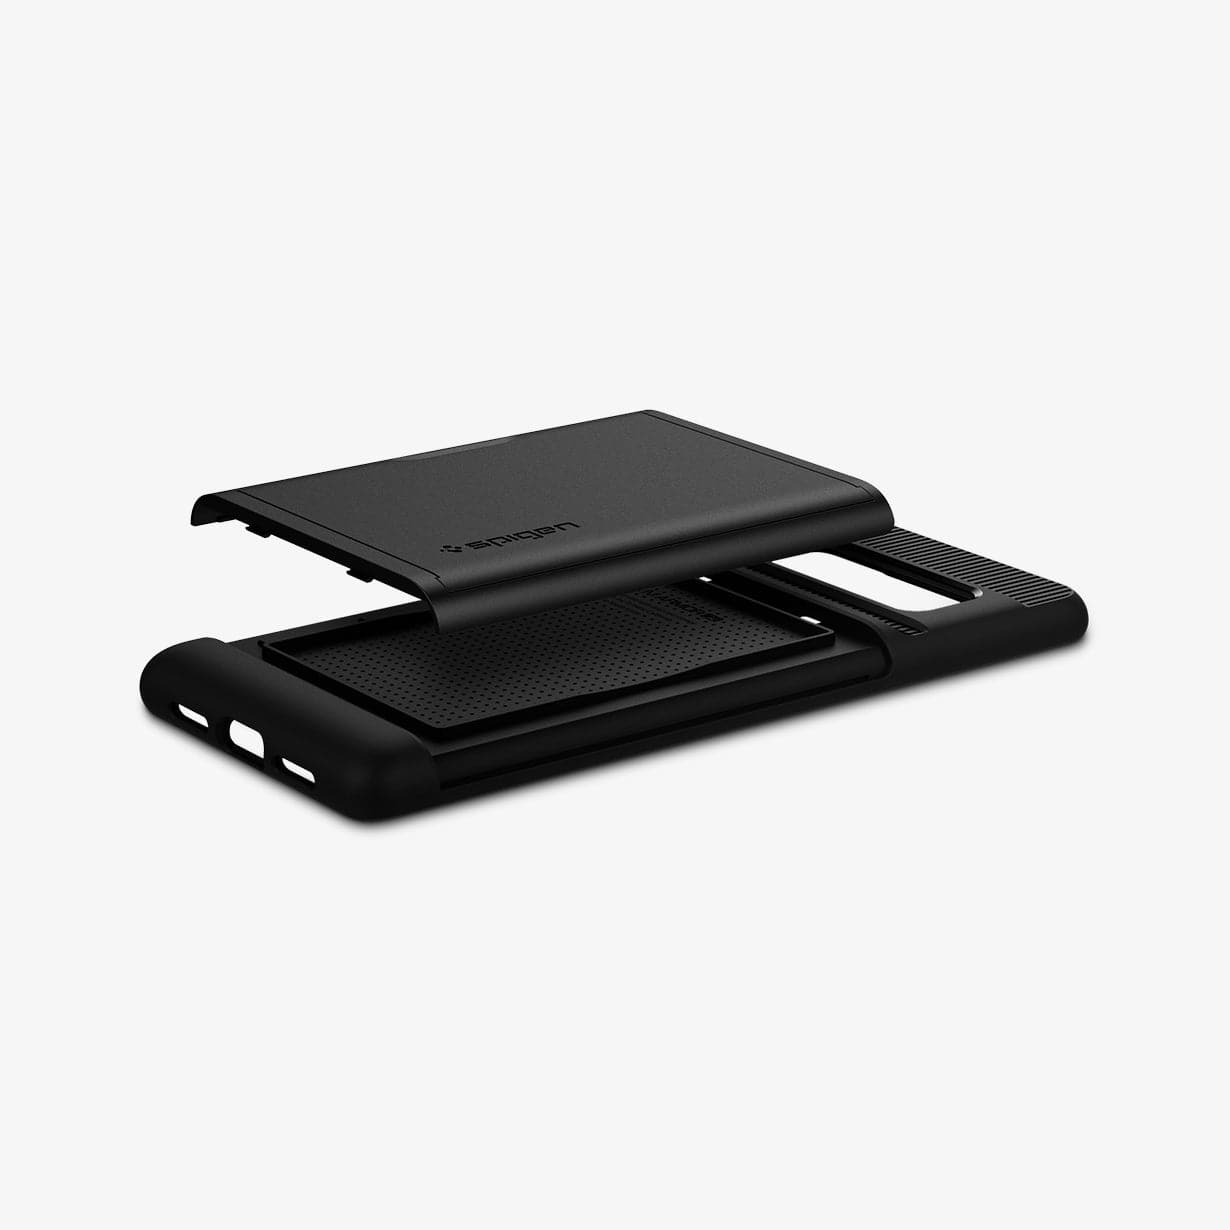 ACS03459 - Pixel 6 Pro Case Slim Armor CS in black showing the bottom side and back with card slot layer